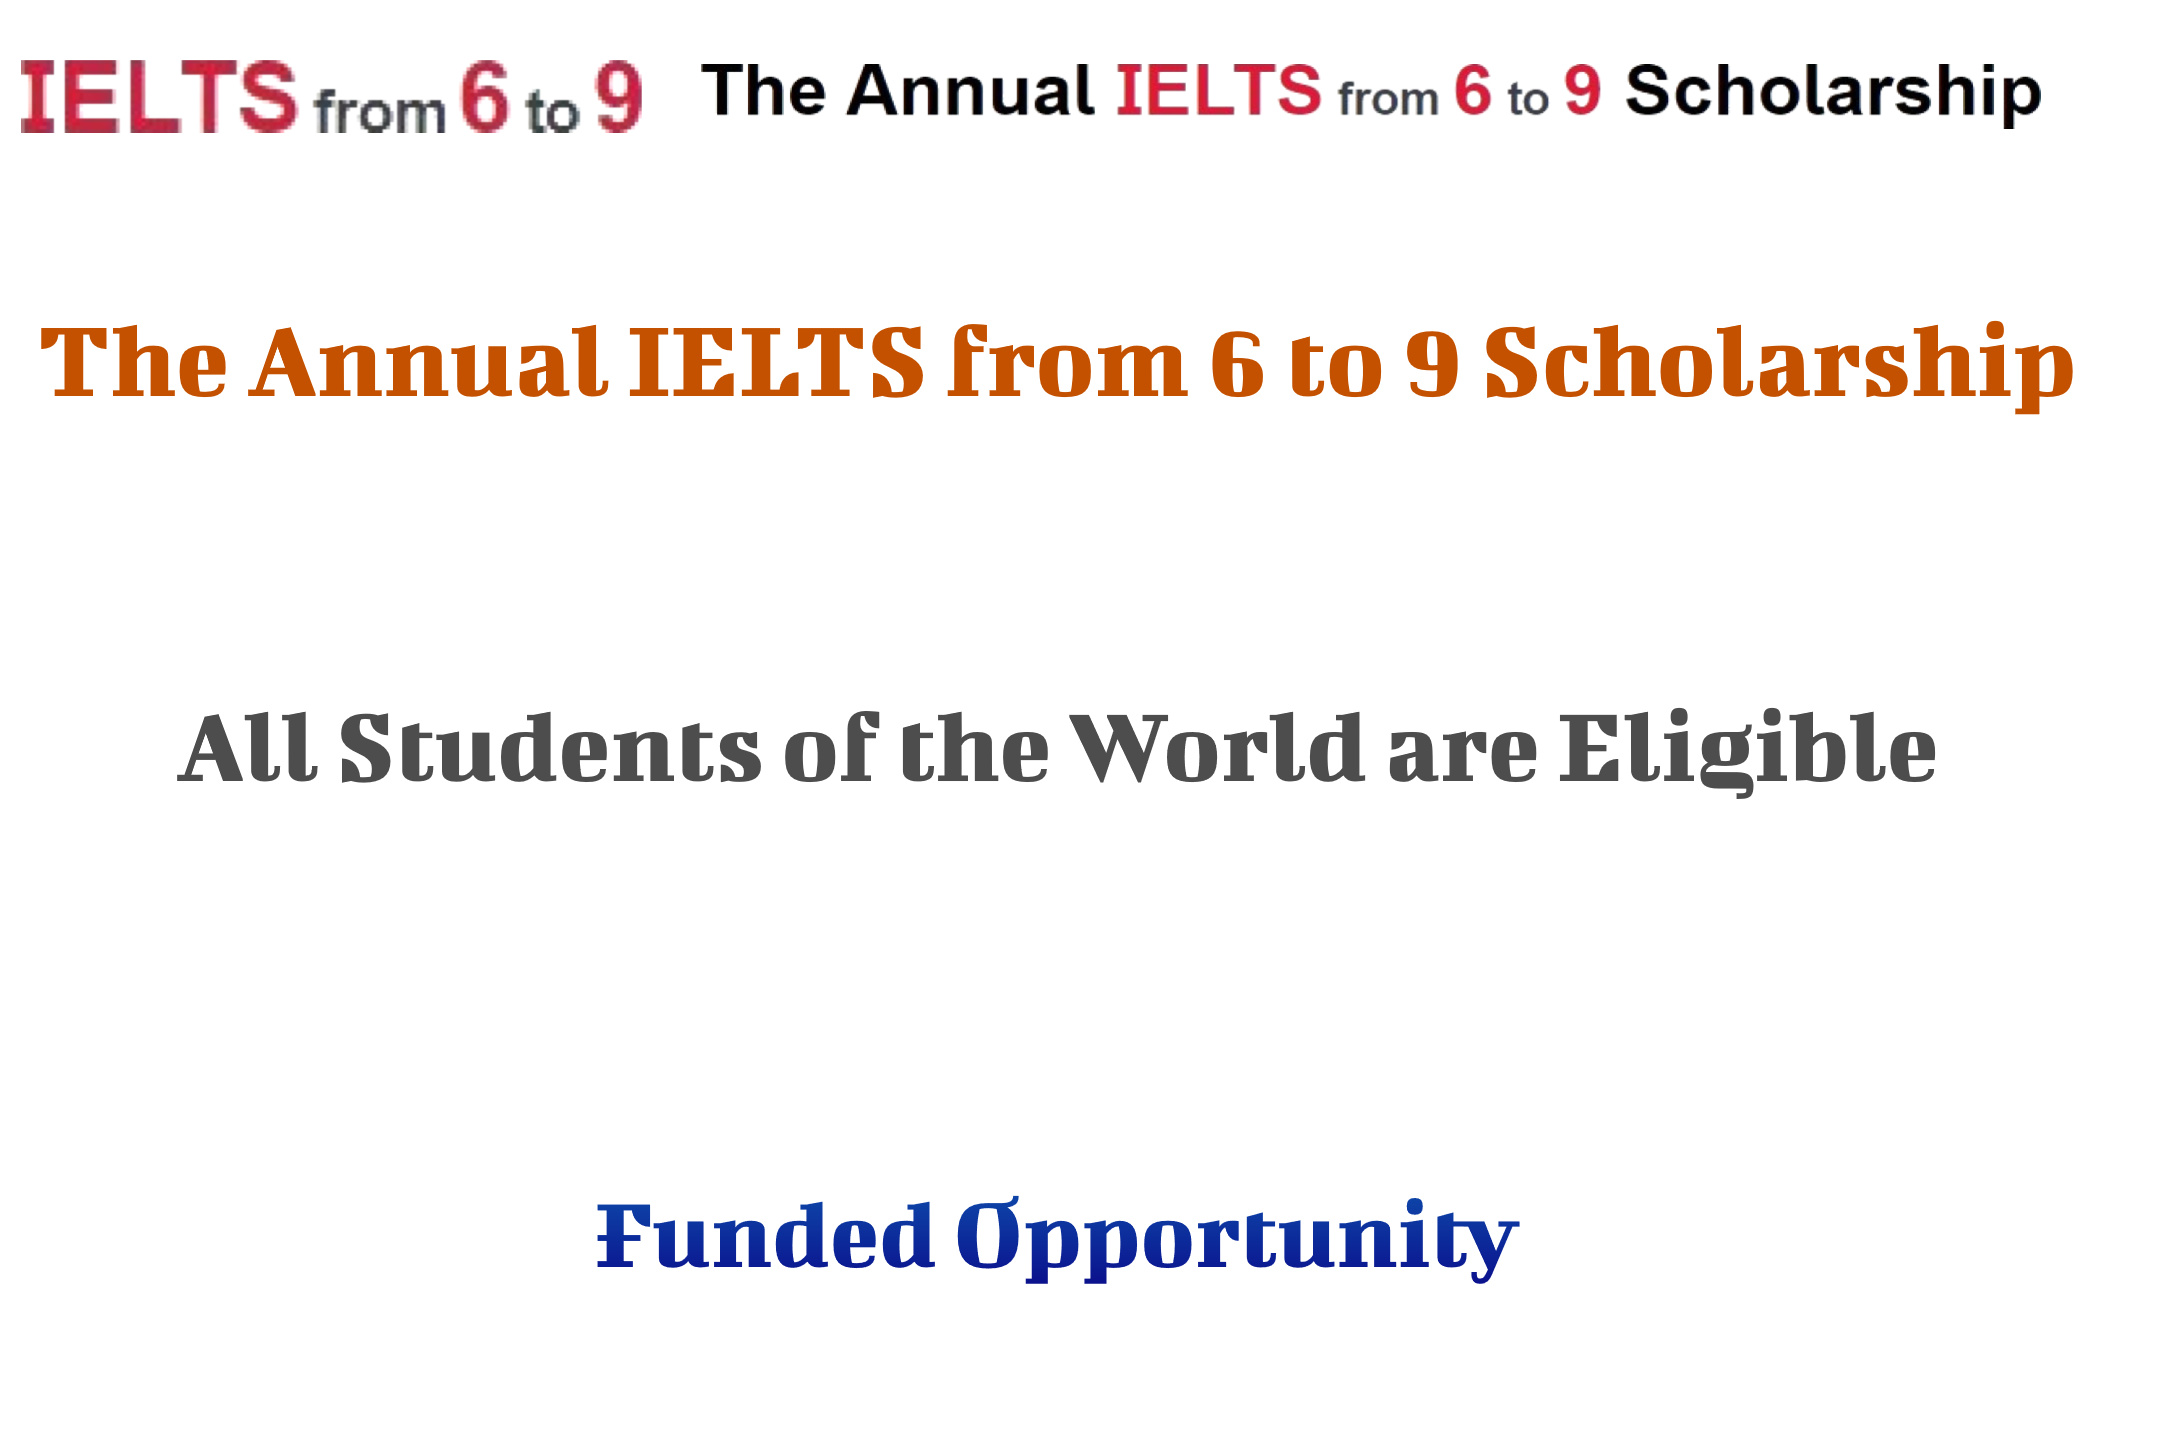 The Annual IELTS from 6 to 9 Scholarship